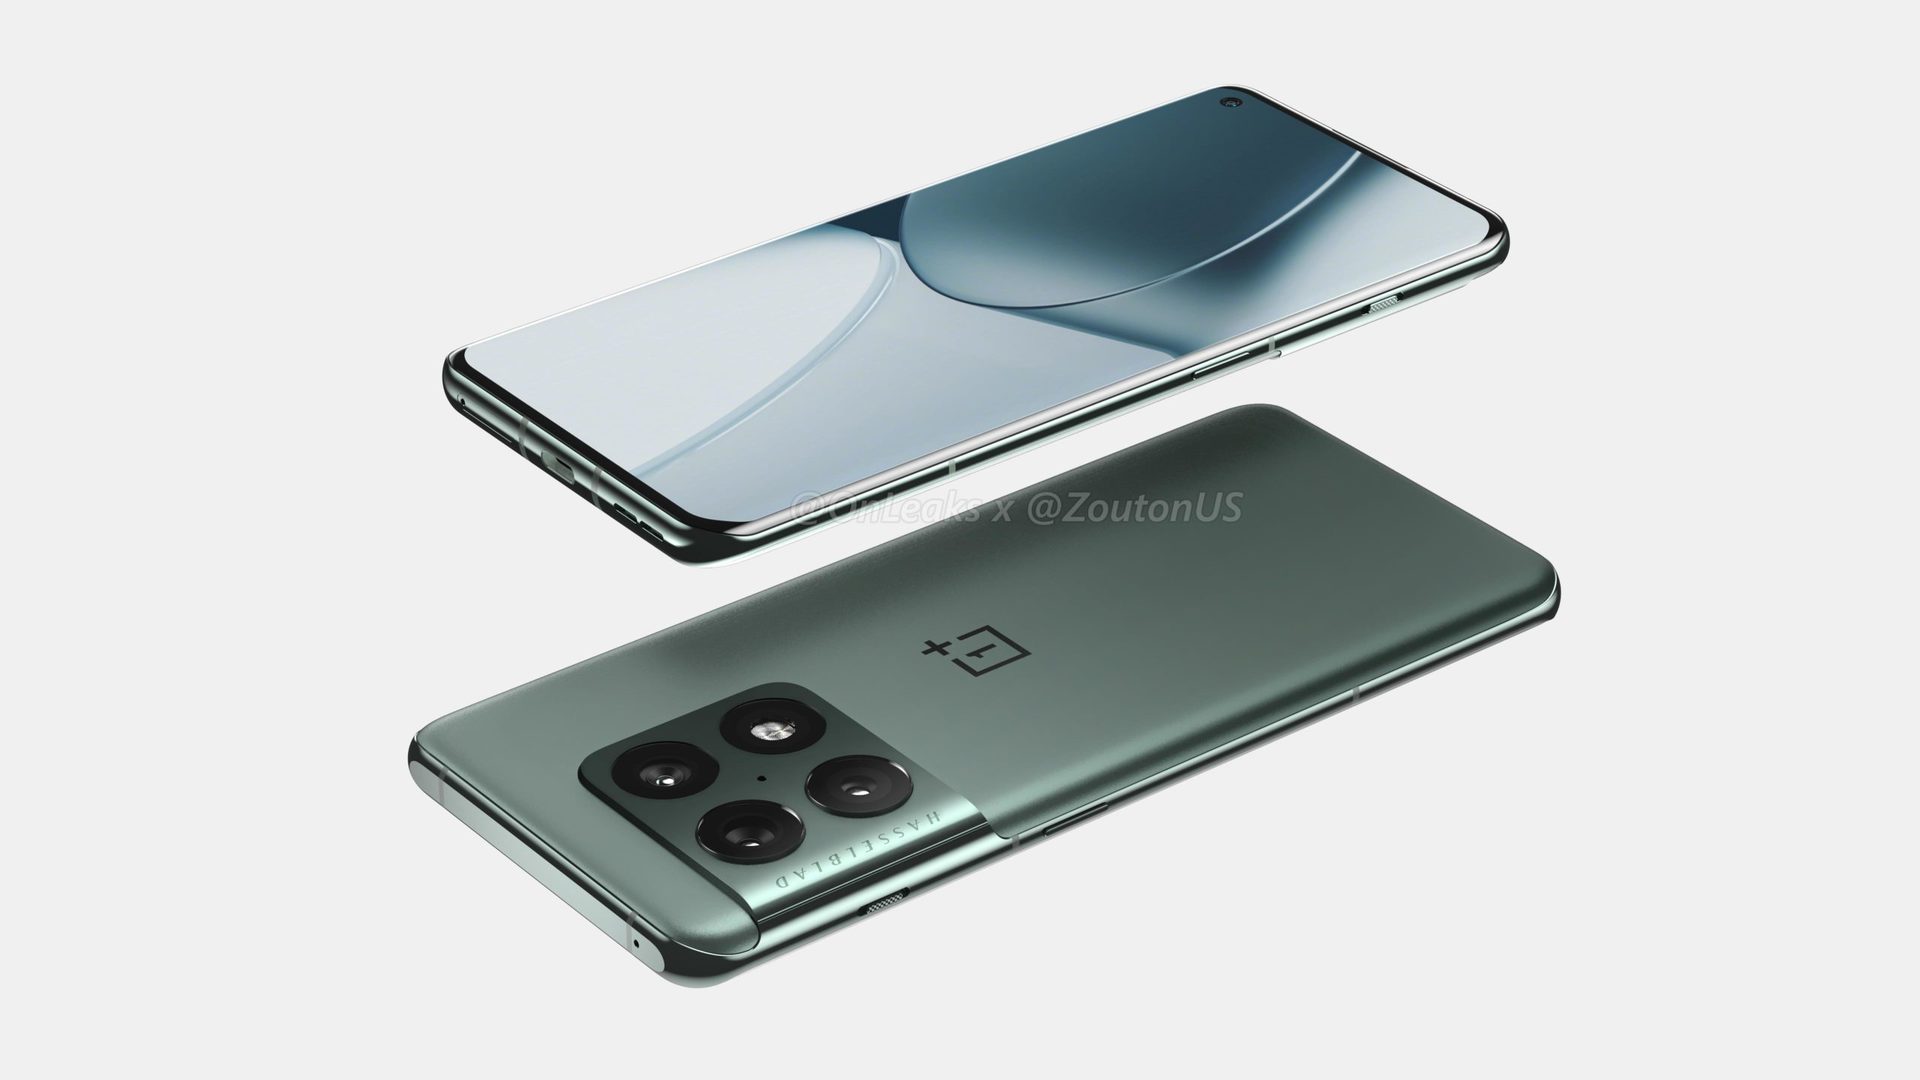 https://www.androidauthority.com/wp-content/uploads/2021/11/OnePlus-10-Pro-onleaks-zouton-1-scaled.jpg